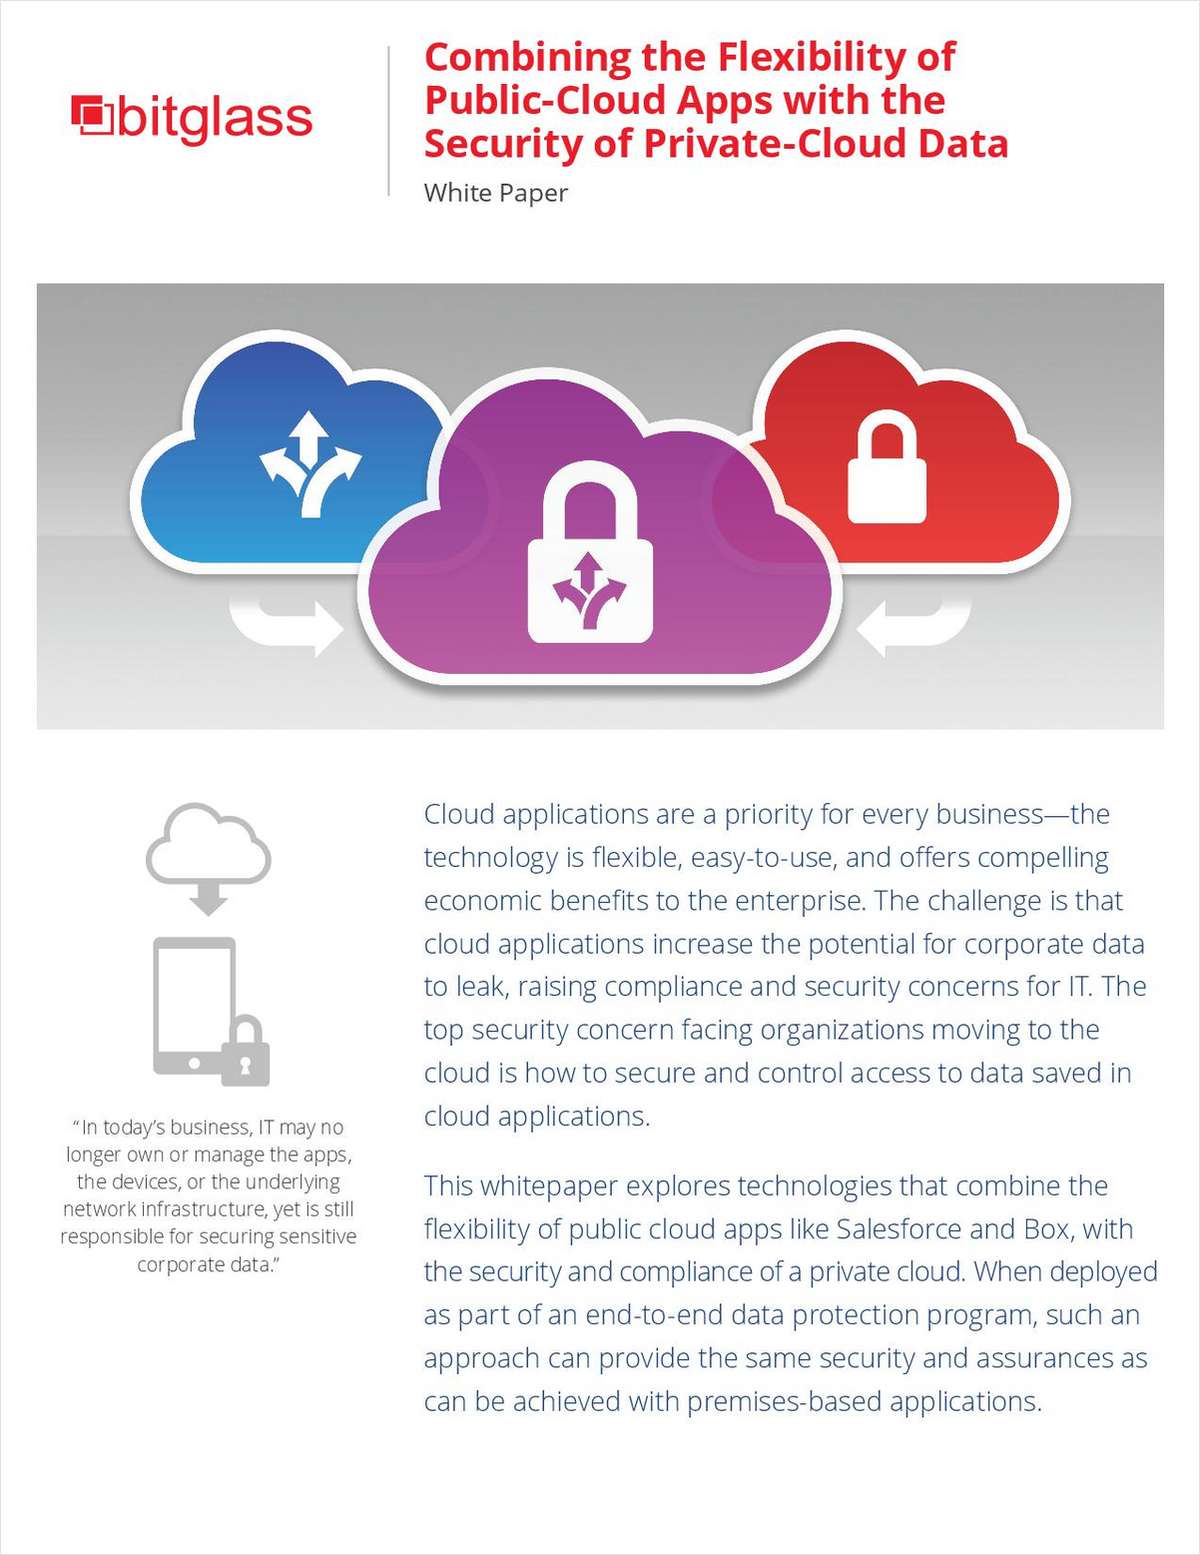 Combining the Flexibility of Public-Cloud Apps with the Security of Private-Cloud Data for the Finance Industry